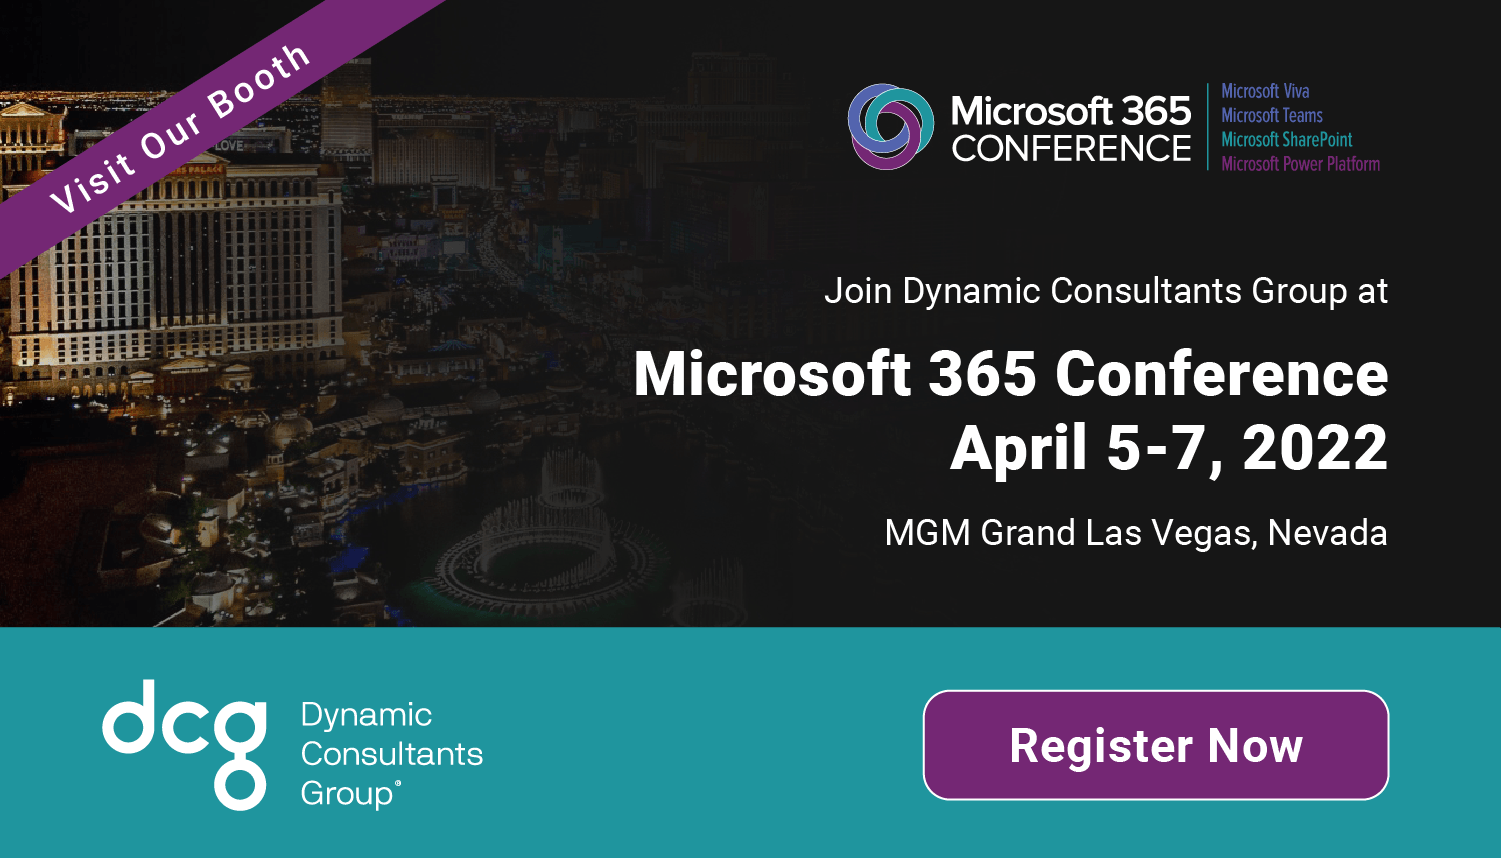 Microsoft 365 Conference 2022Sponsored by Dynamic Consultants Group